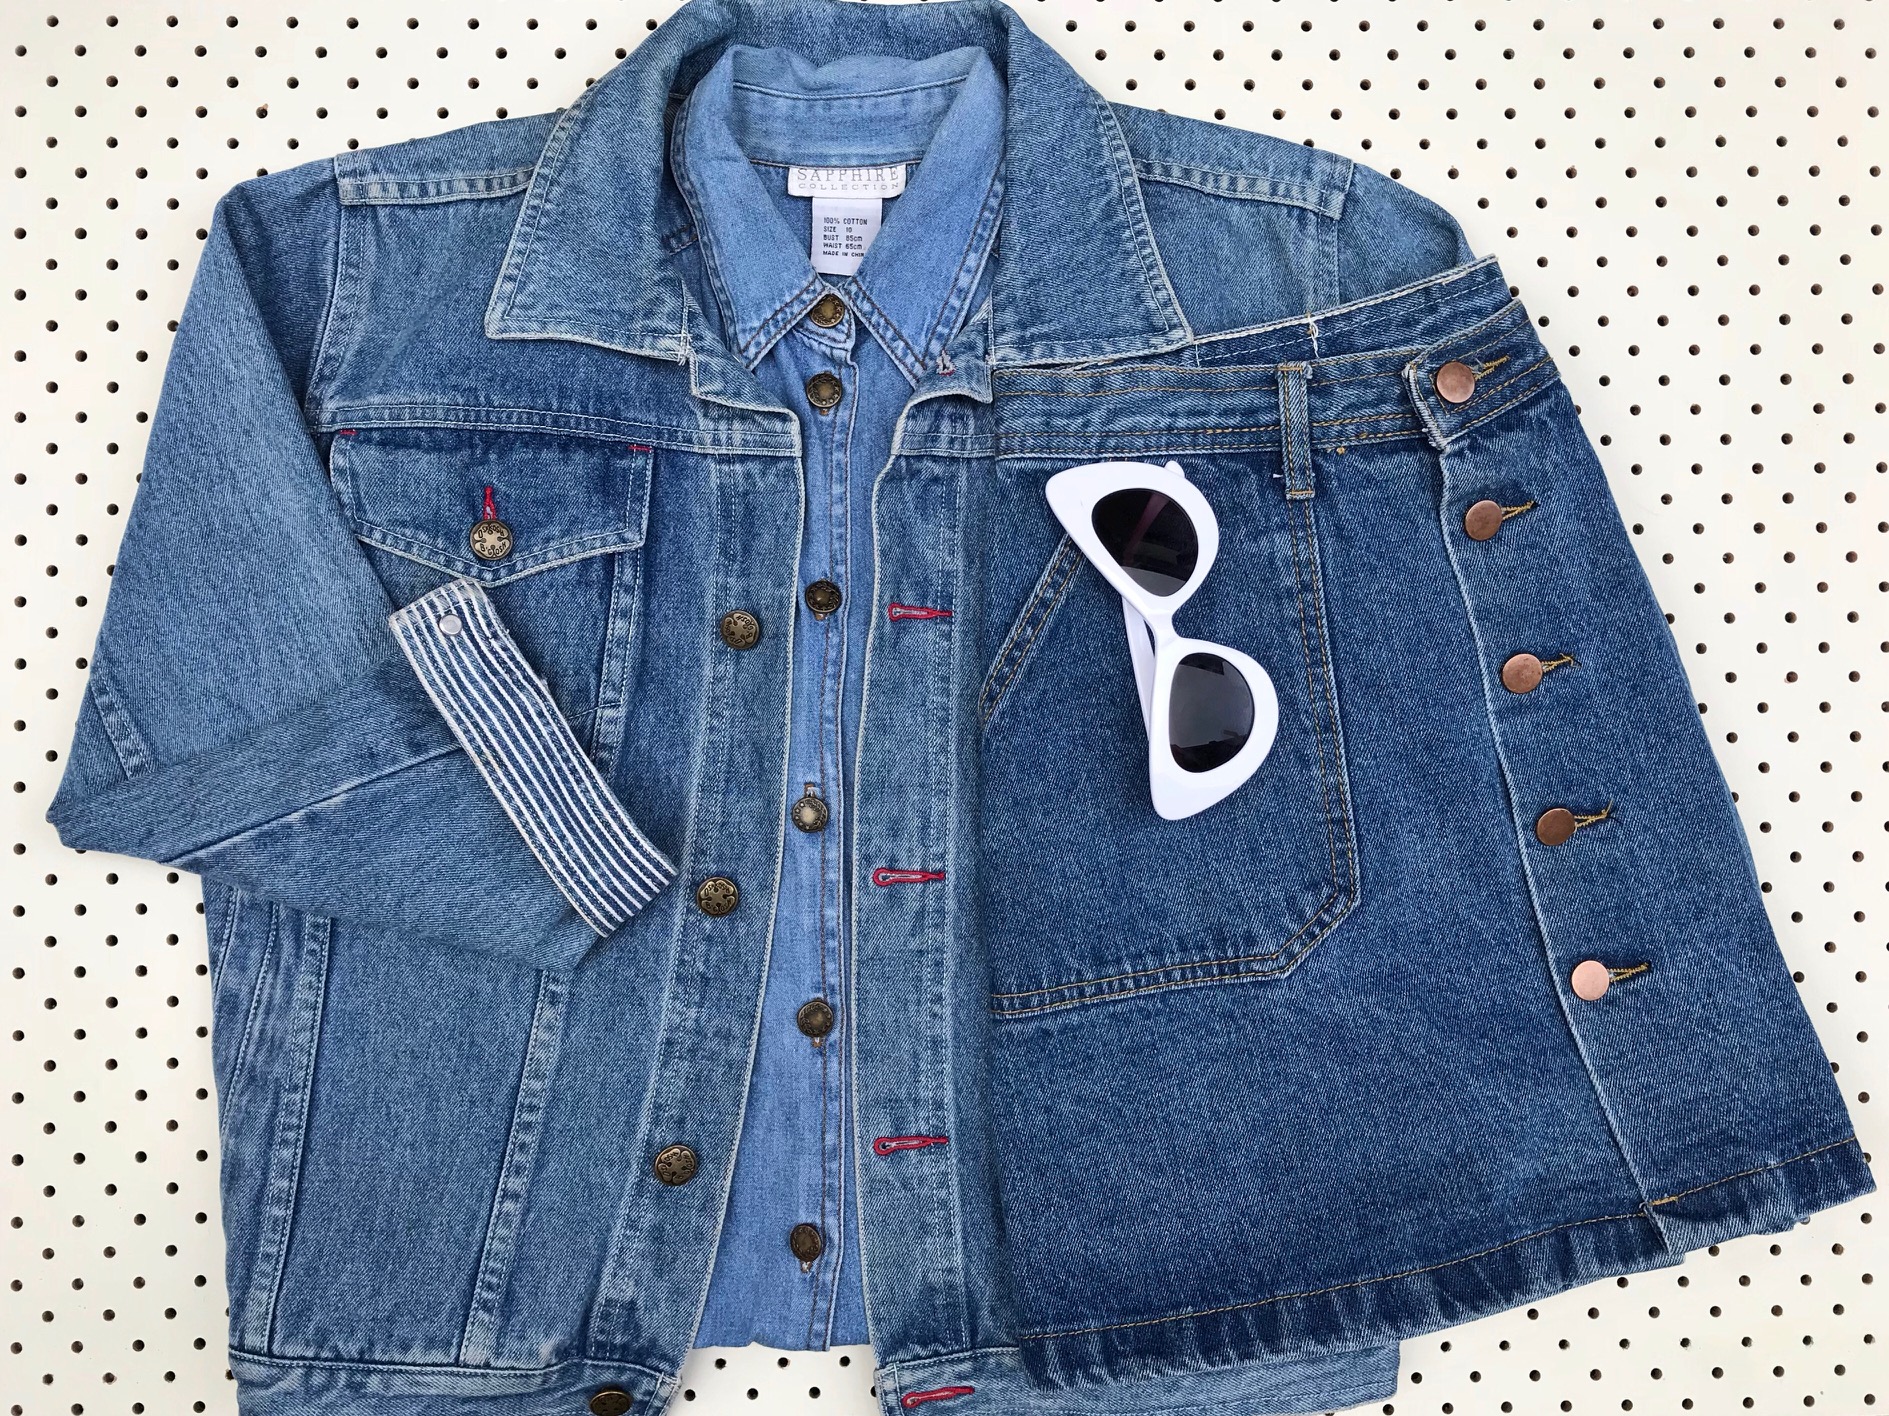 Never ever pay retail and Peppermint: op shopping denim jacket